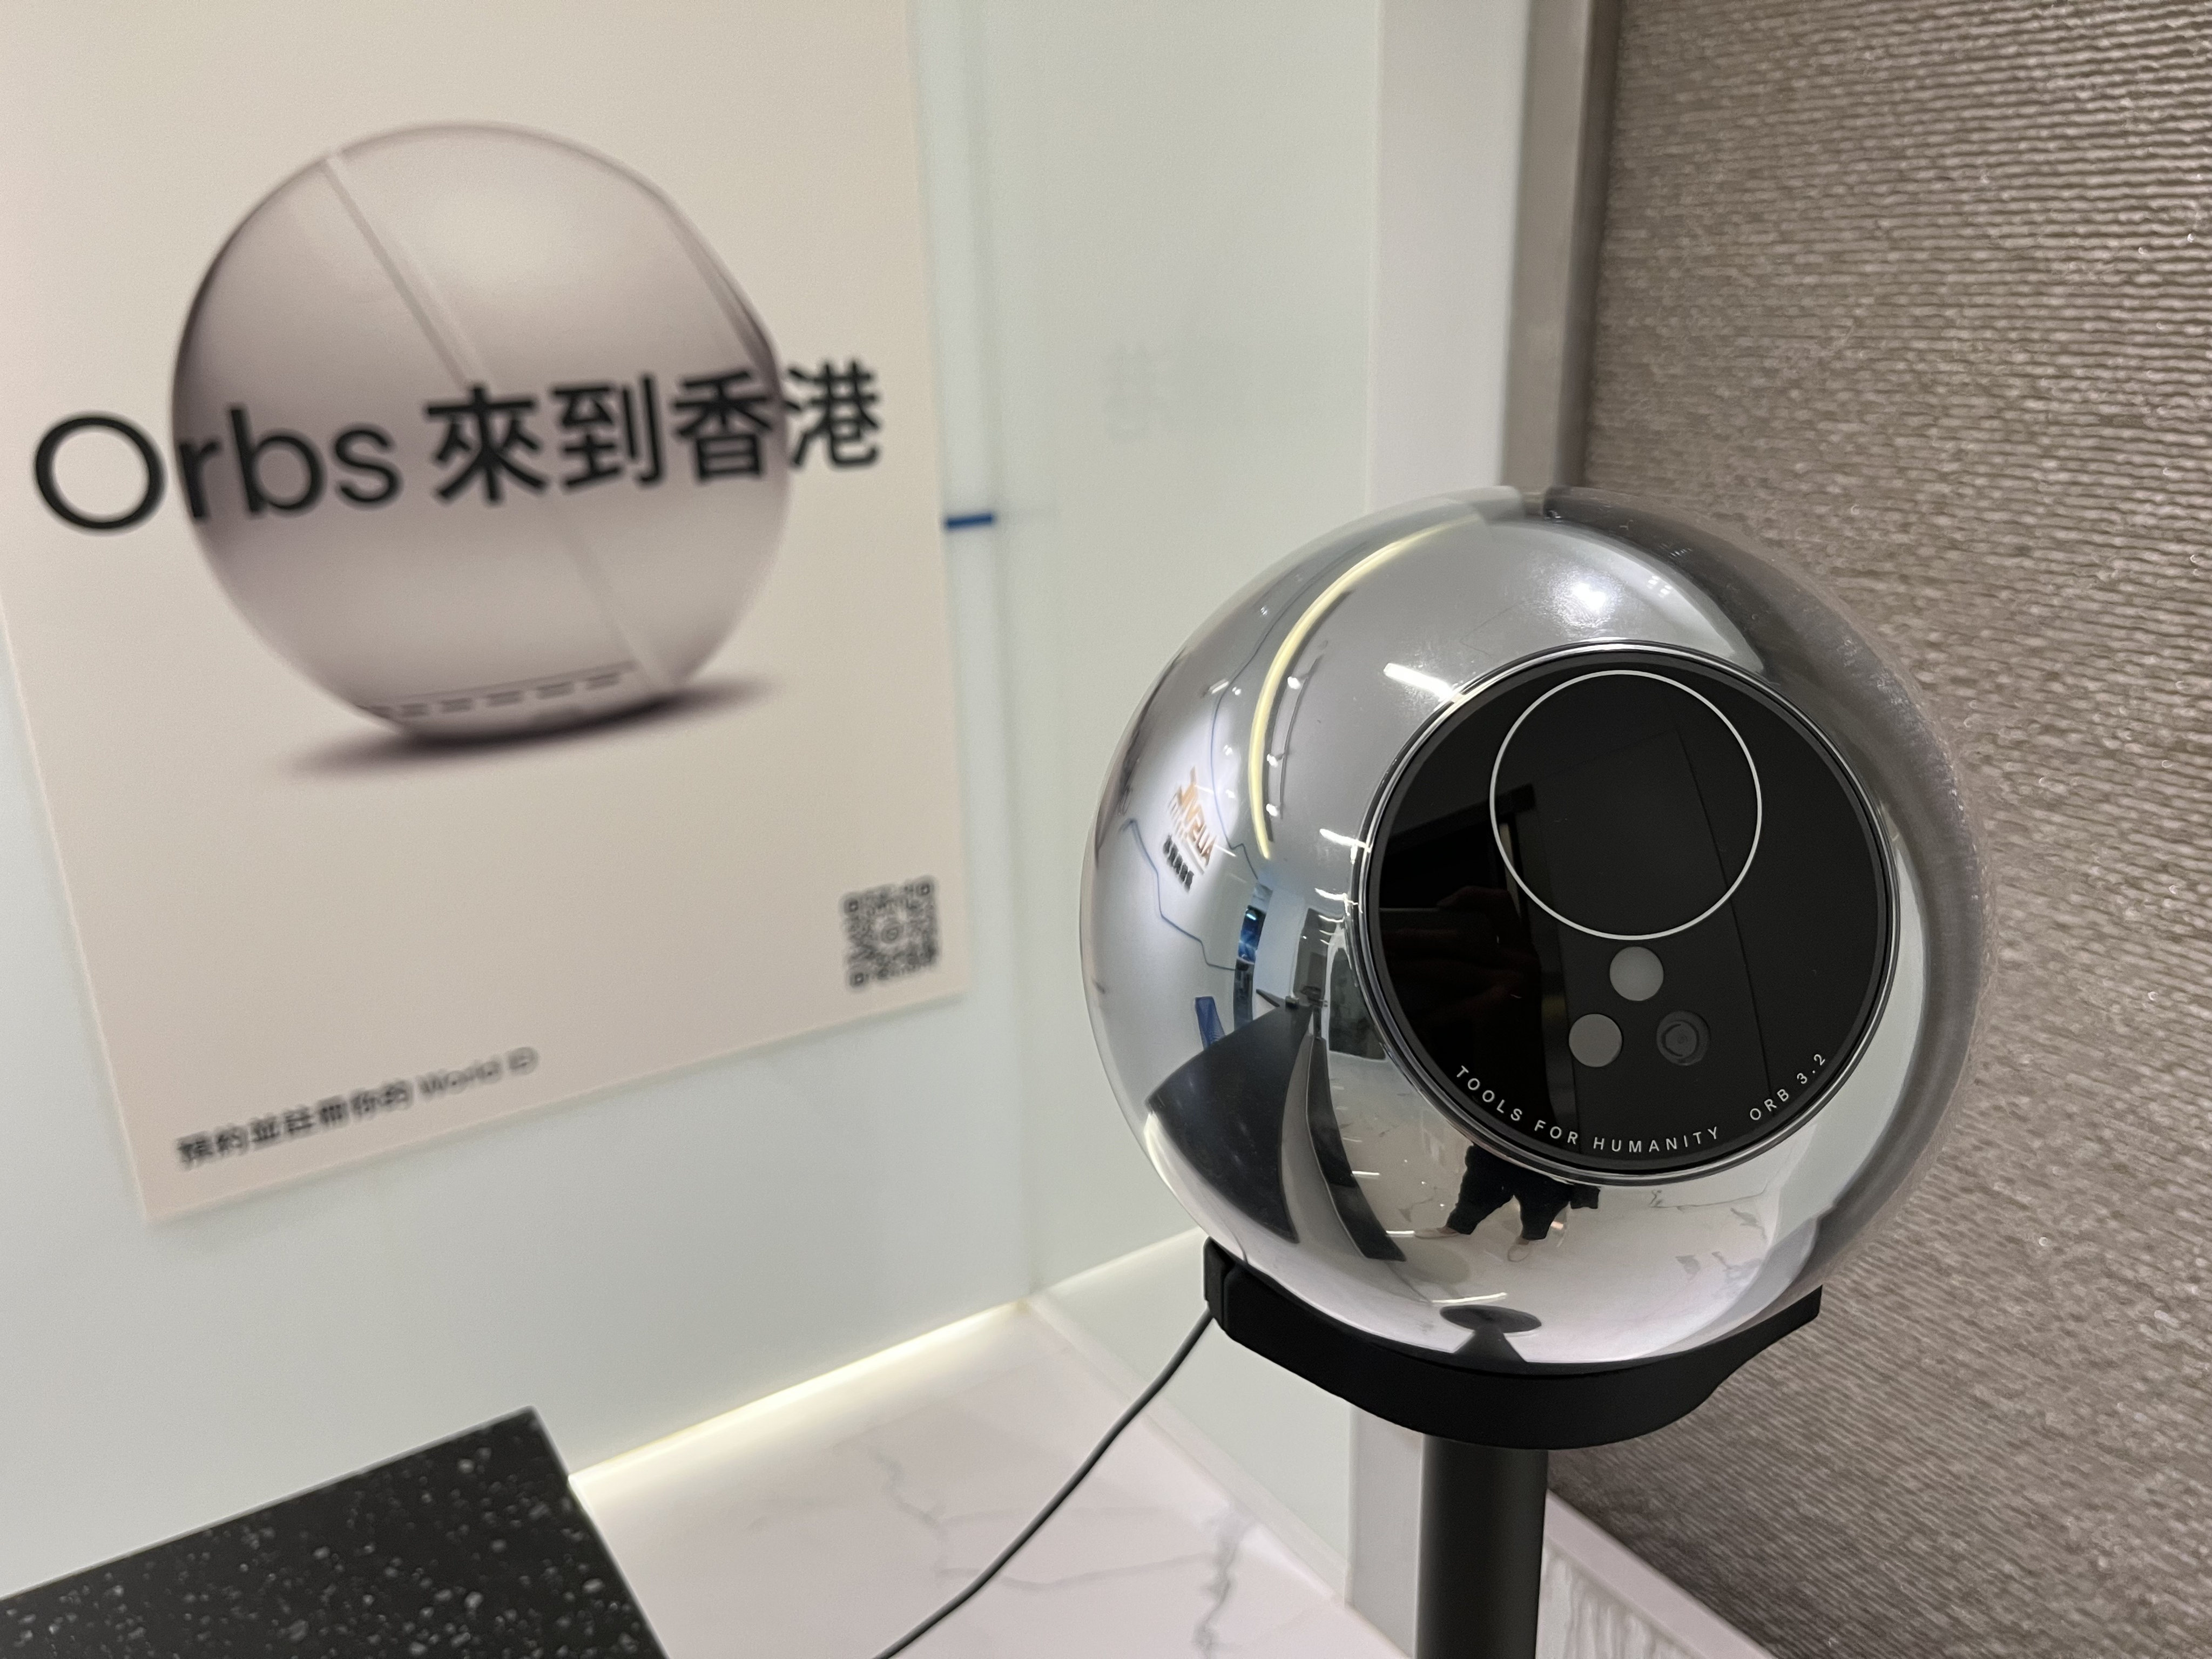 A scanner of the type used by digital ID and cryptocurrency company Worldcoin, which is under investigation by the city’s privacy watchdog. Photo: Handout